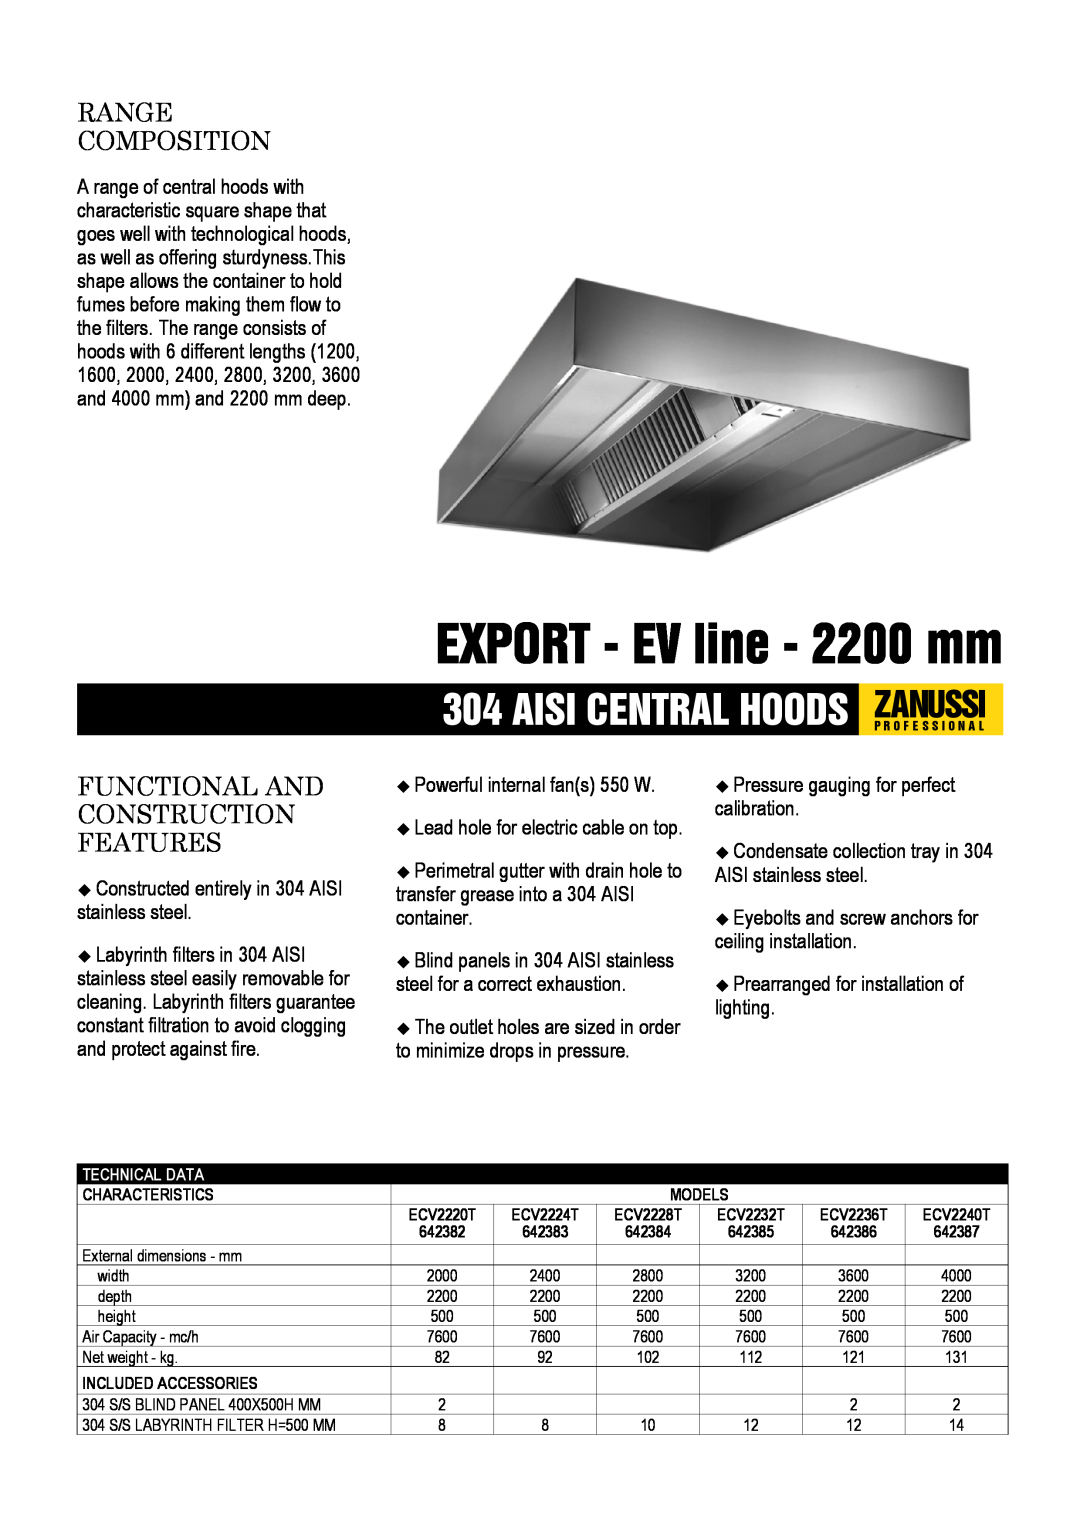 Zanussi ECV2240T, ECV2236T dimensions EXPORT - EV line - 2200 mm, Range Composition, Functional And Construction Features 